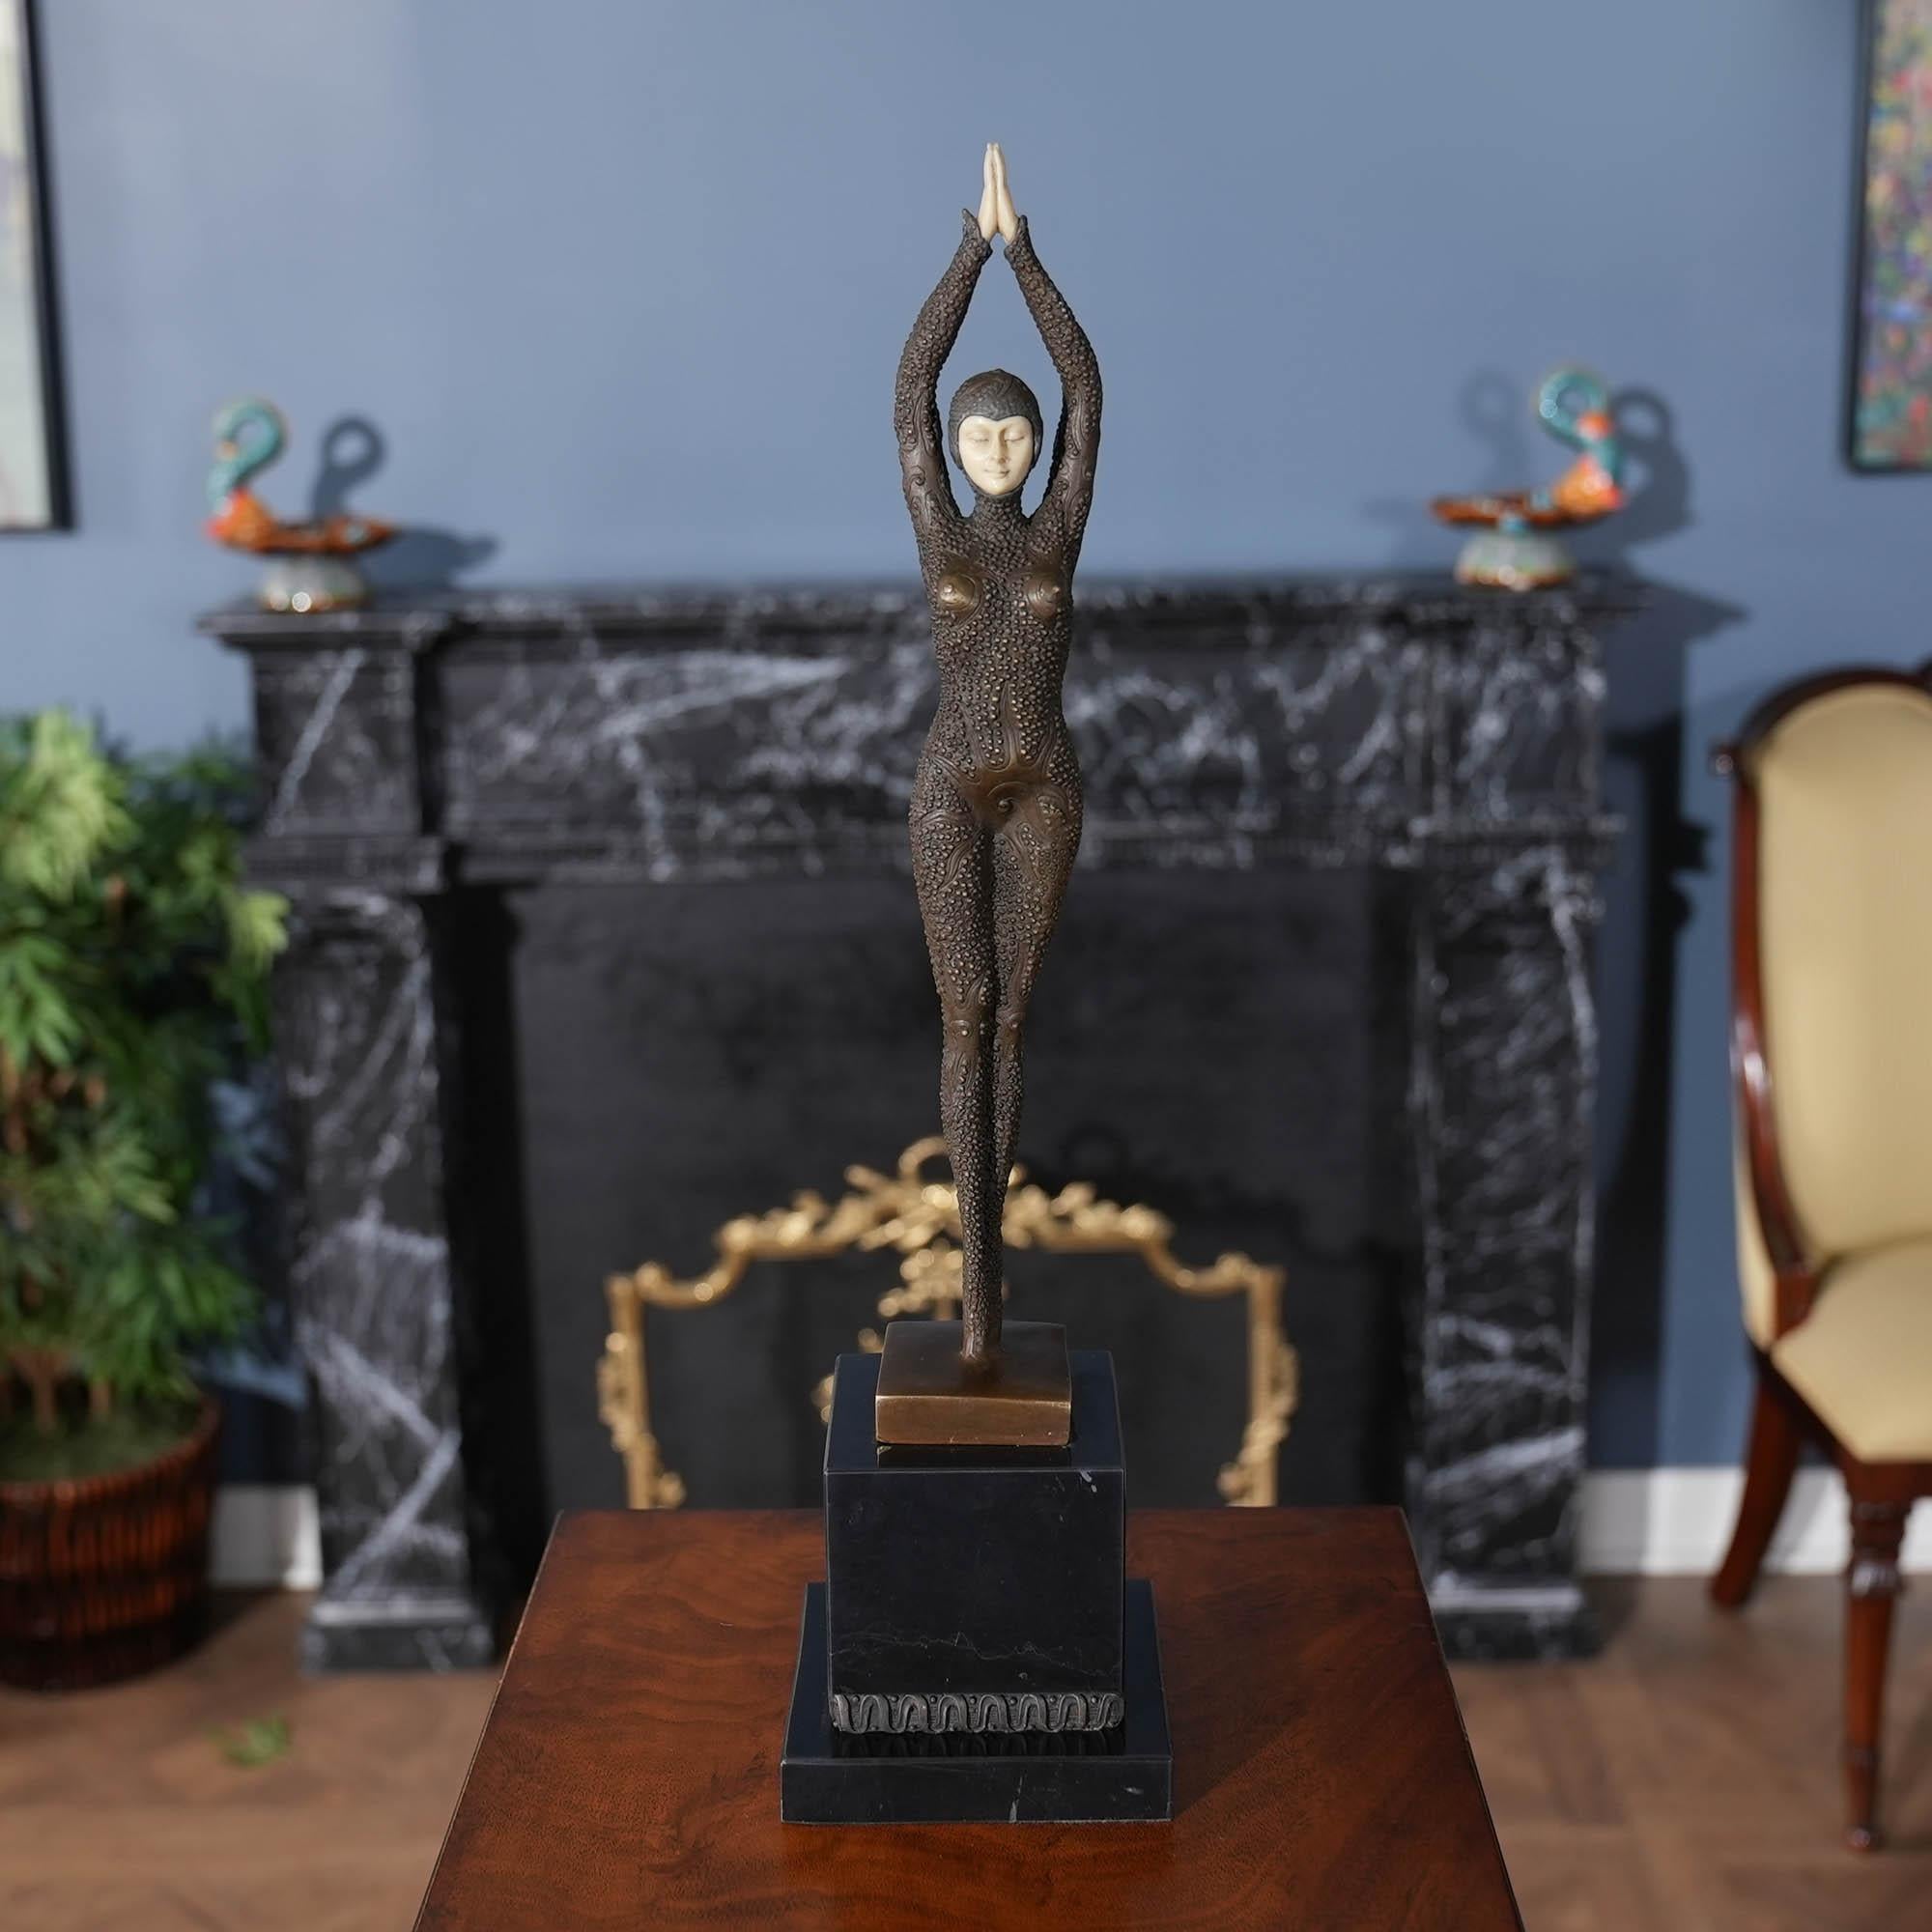 Graceful even when standing still the Bronze Sequined Dancer on Marble Base is a striking addition to any setting. Using traditional lost wax casting methods the Bronze Sequined Dancer statue has hand chaised details added to give a high level of